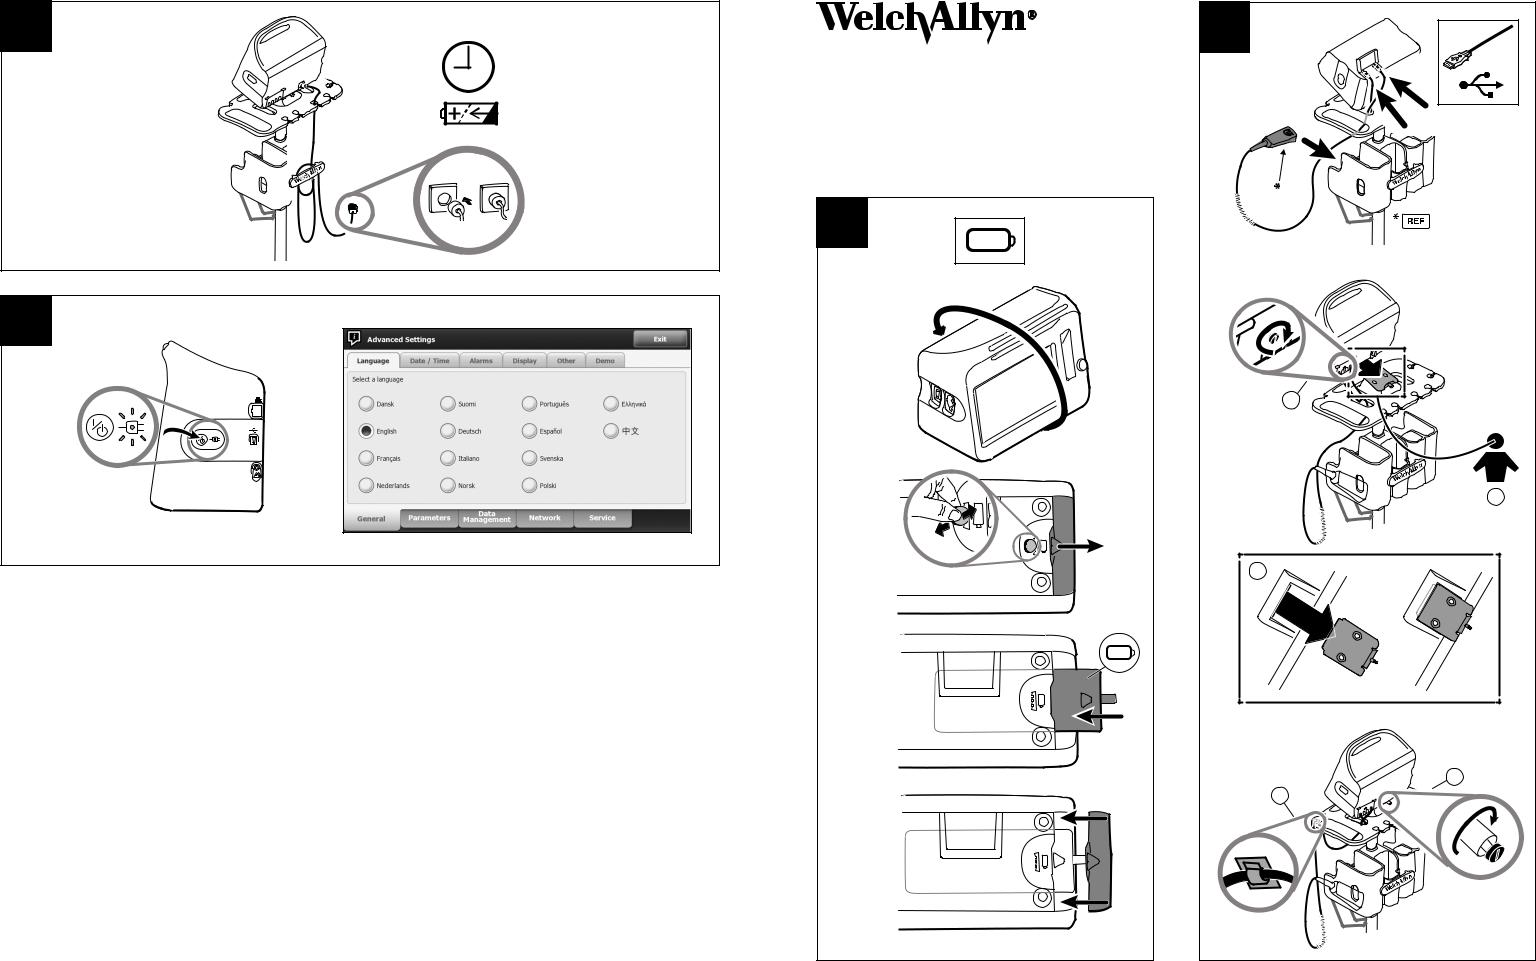 Welch Allyn Connex Vital Signs Monitor Installation Guide